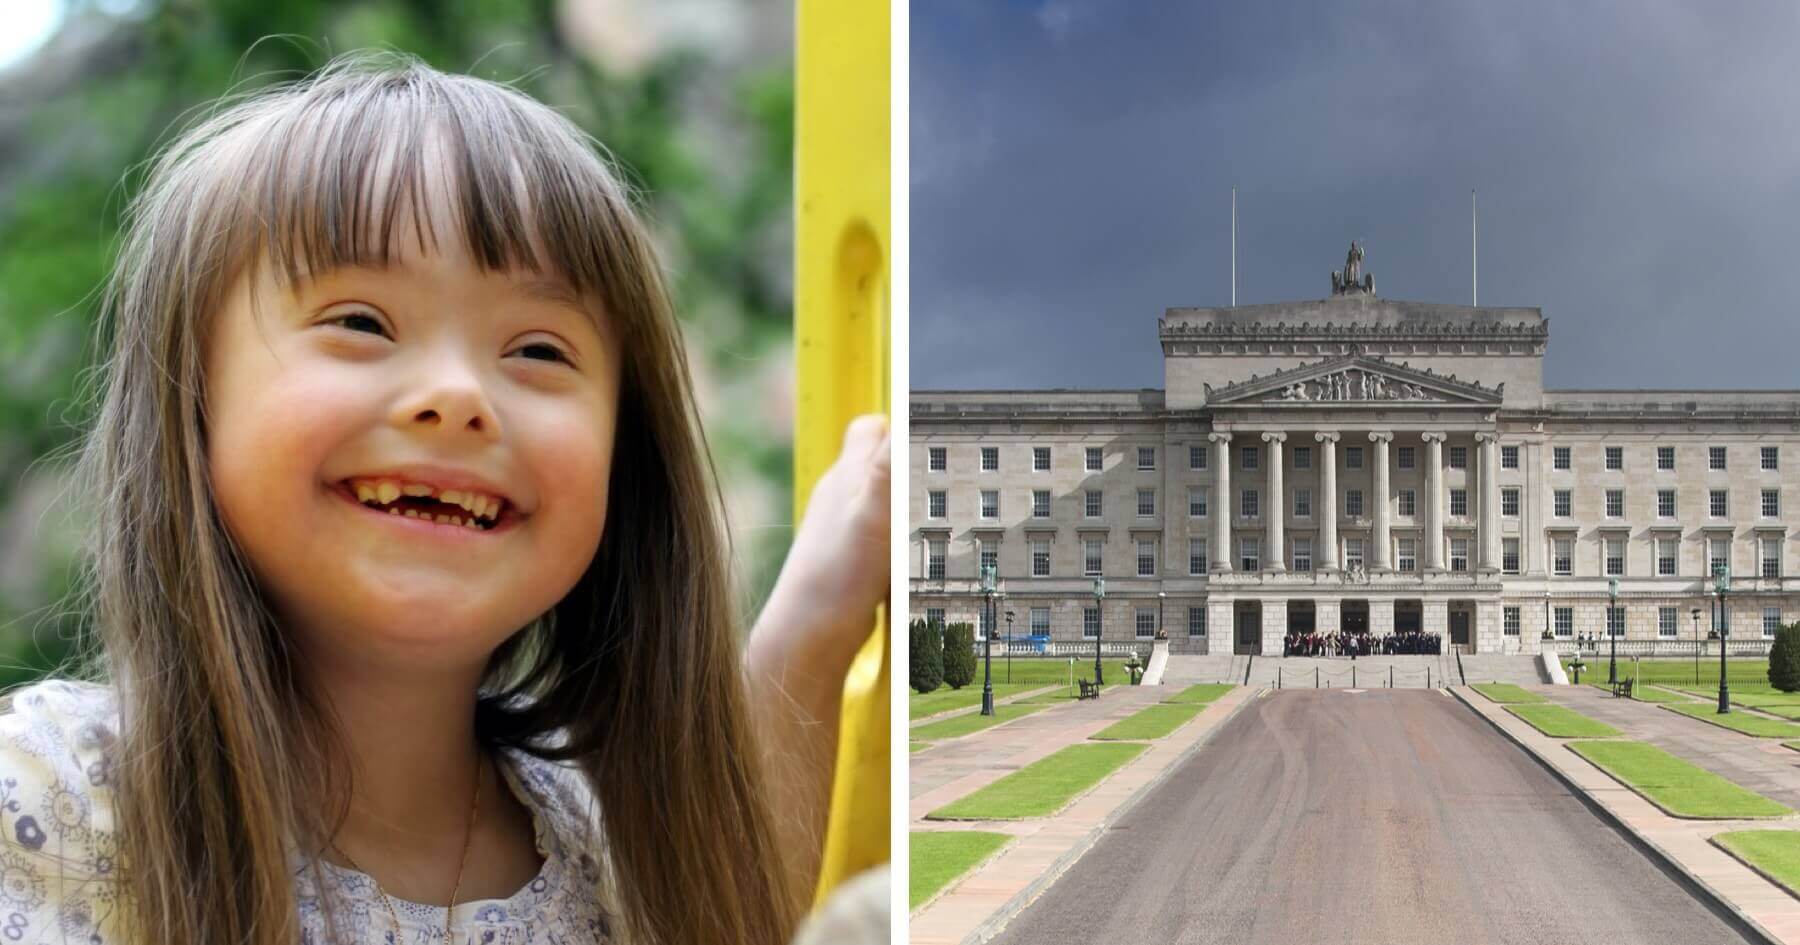 1,500 people with Down's syndrome and families call for end to abortion up to birth for Down’s syndrome in NI